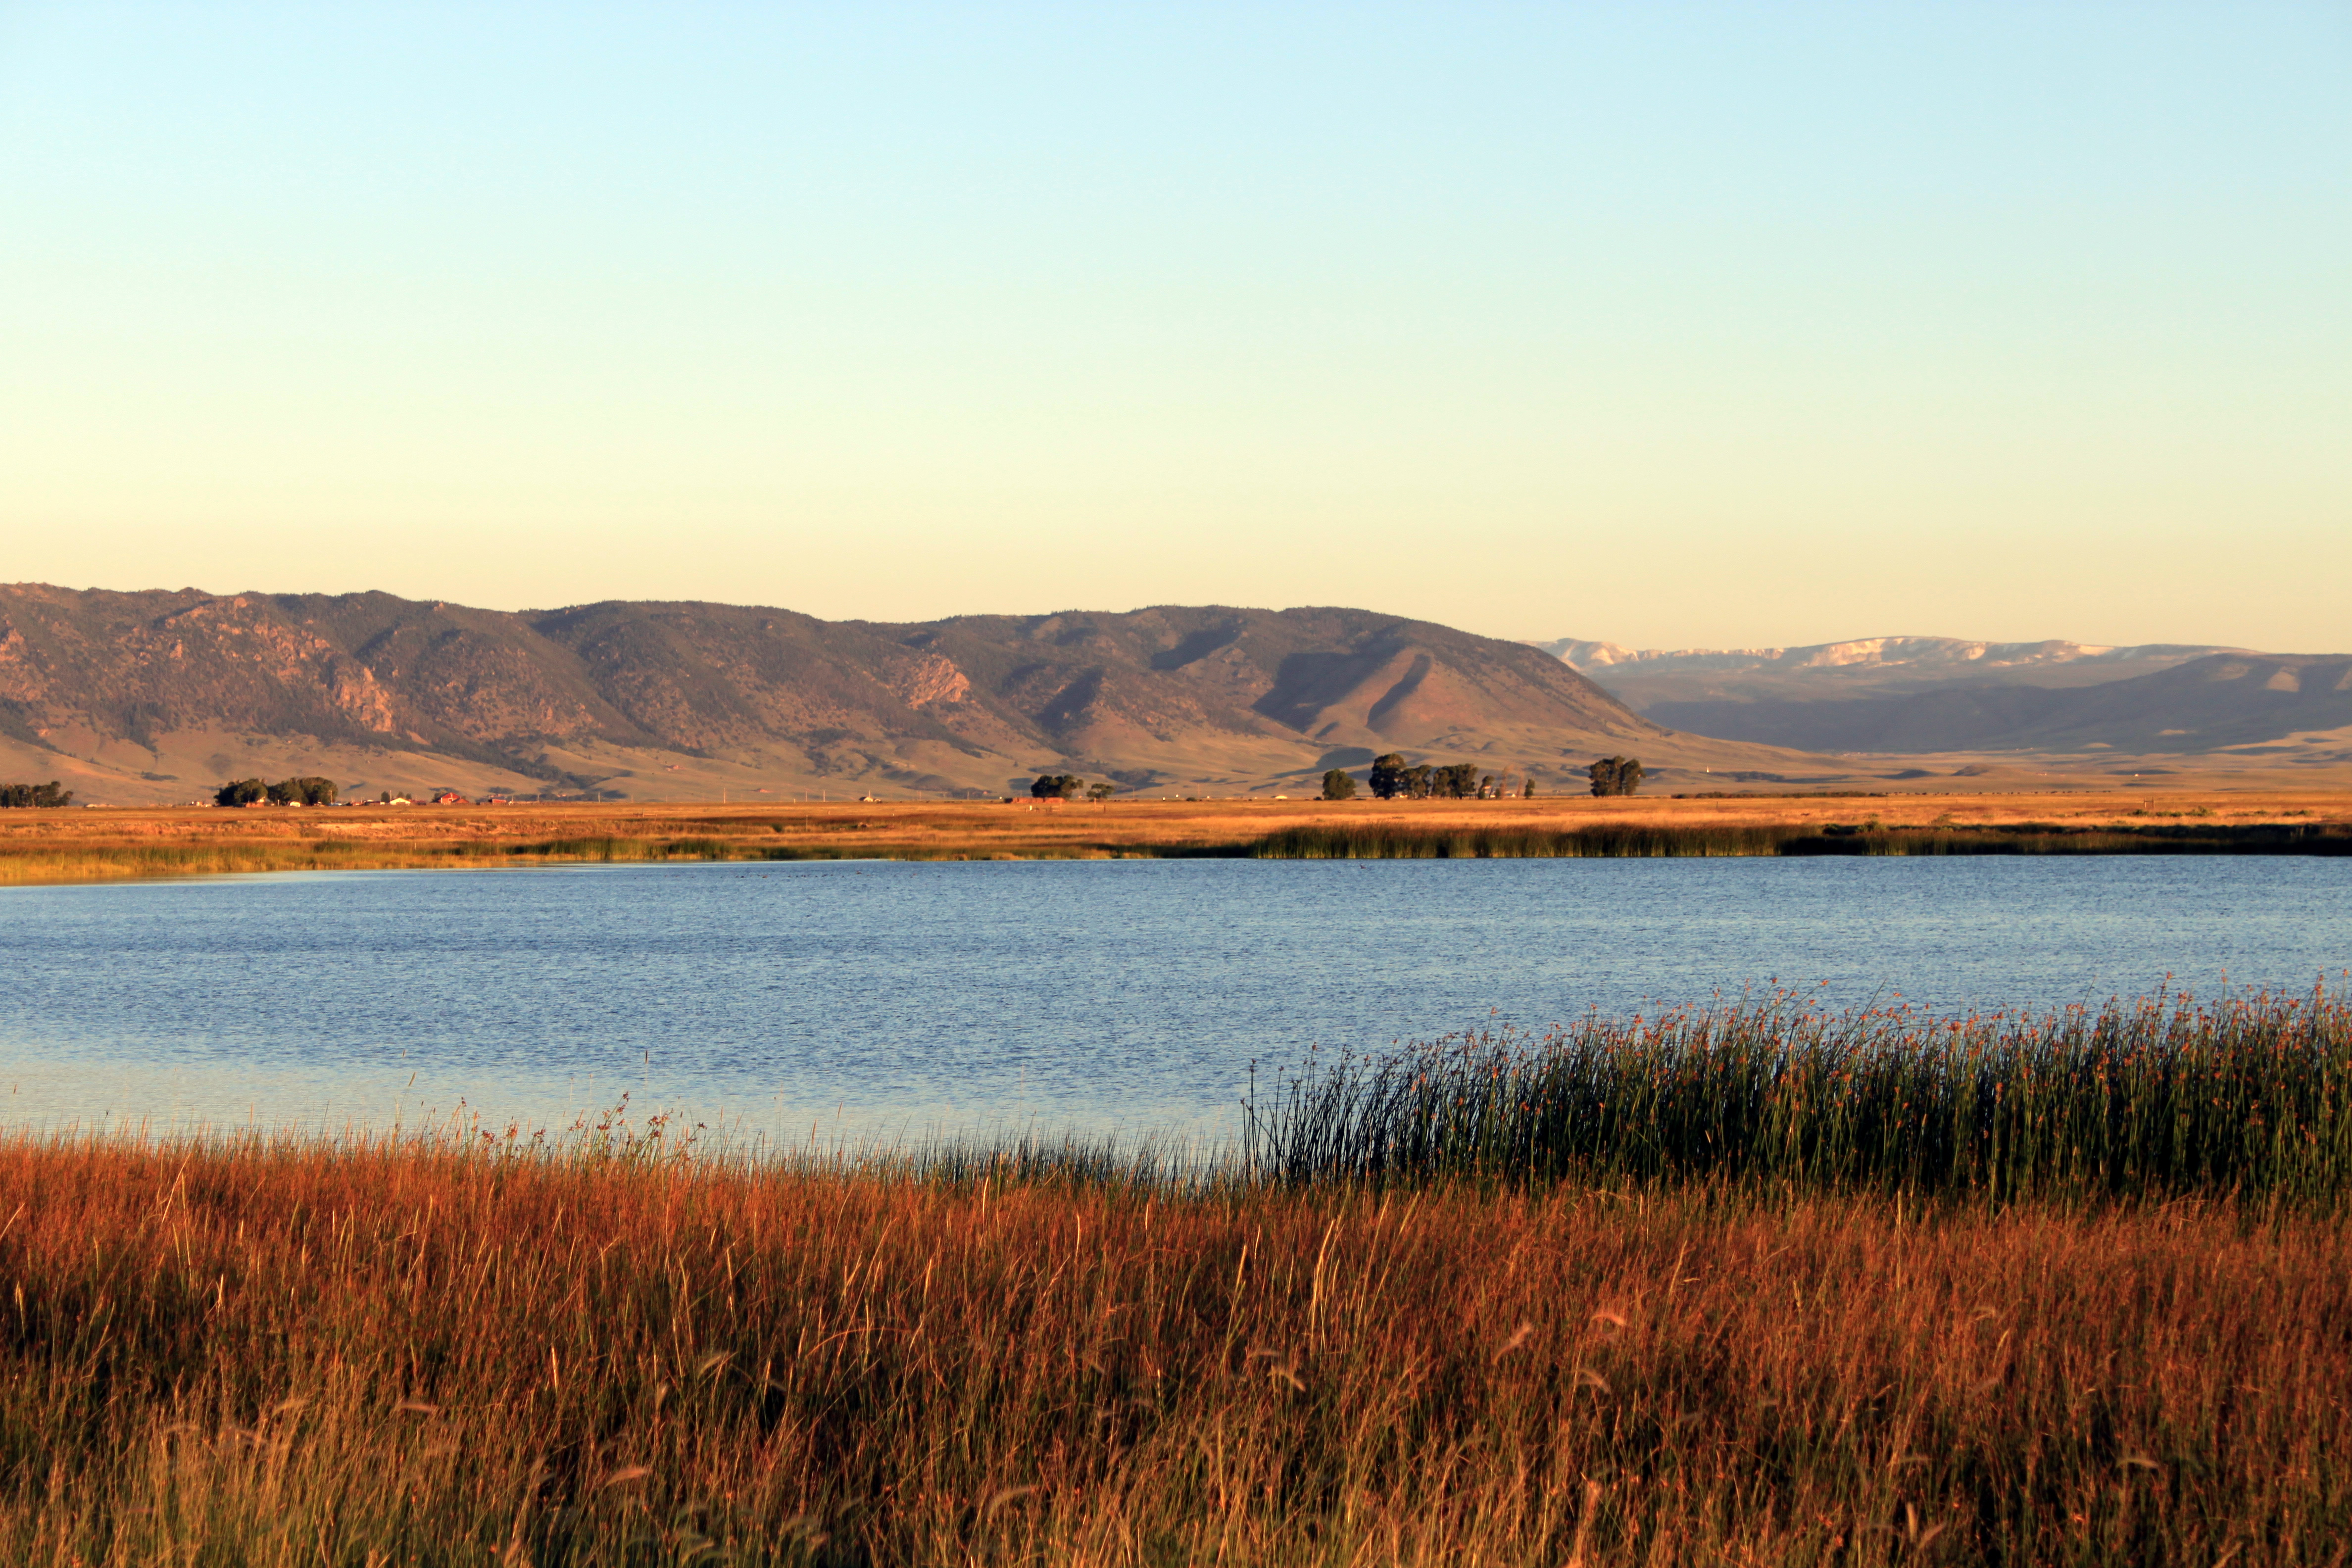 Morning view of Mortenson Lake National Wildlife Refuge, part of the Laramie Plains refuges in south central Wyoming.